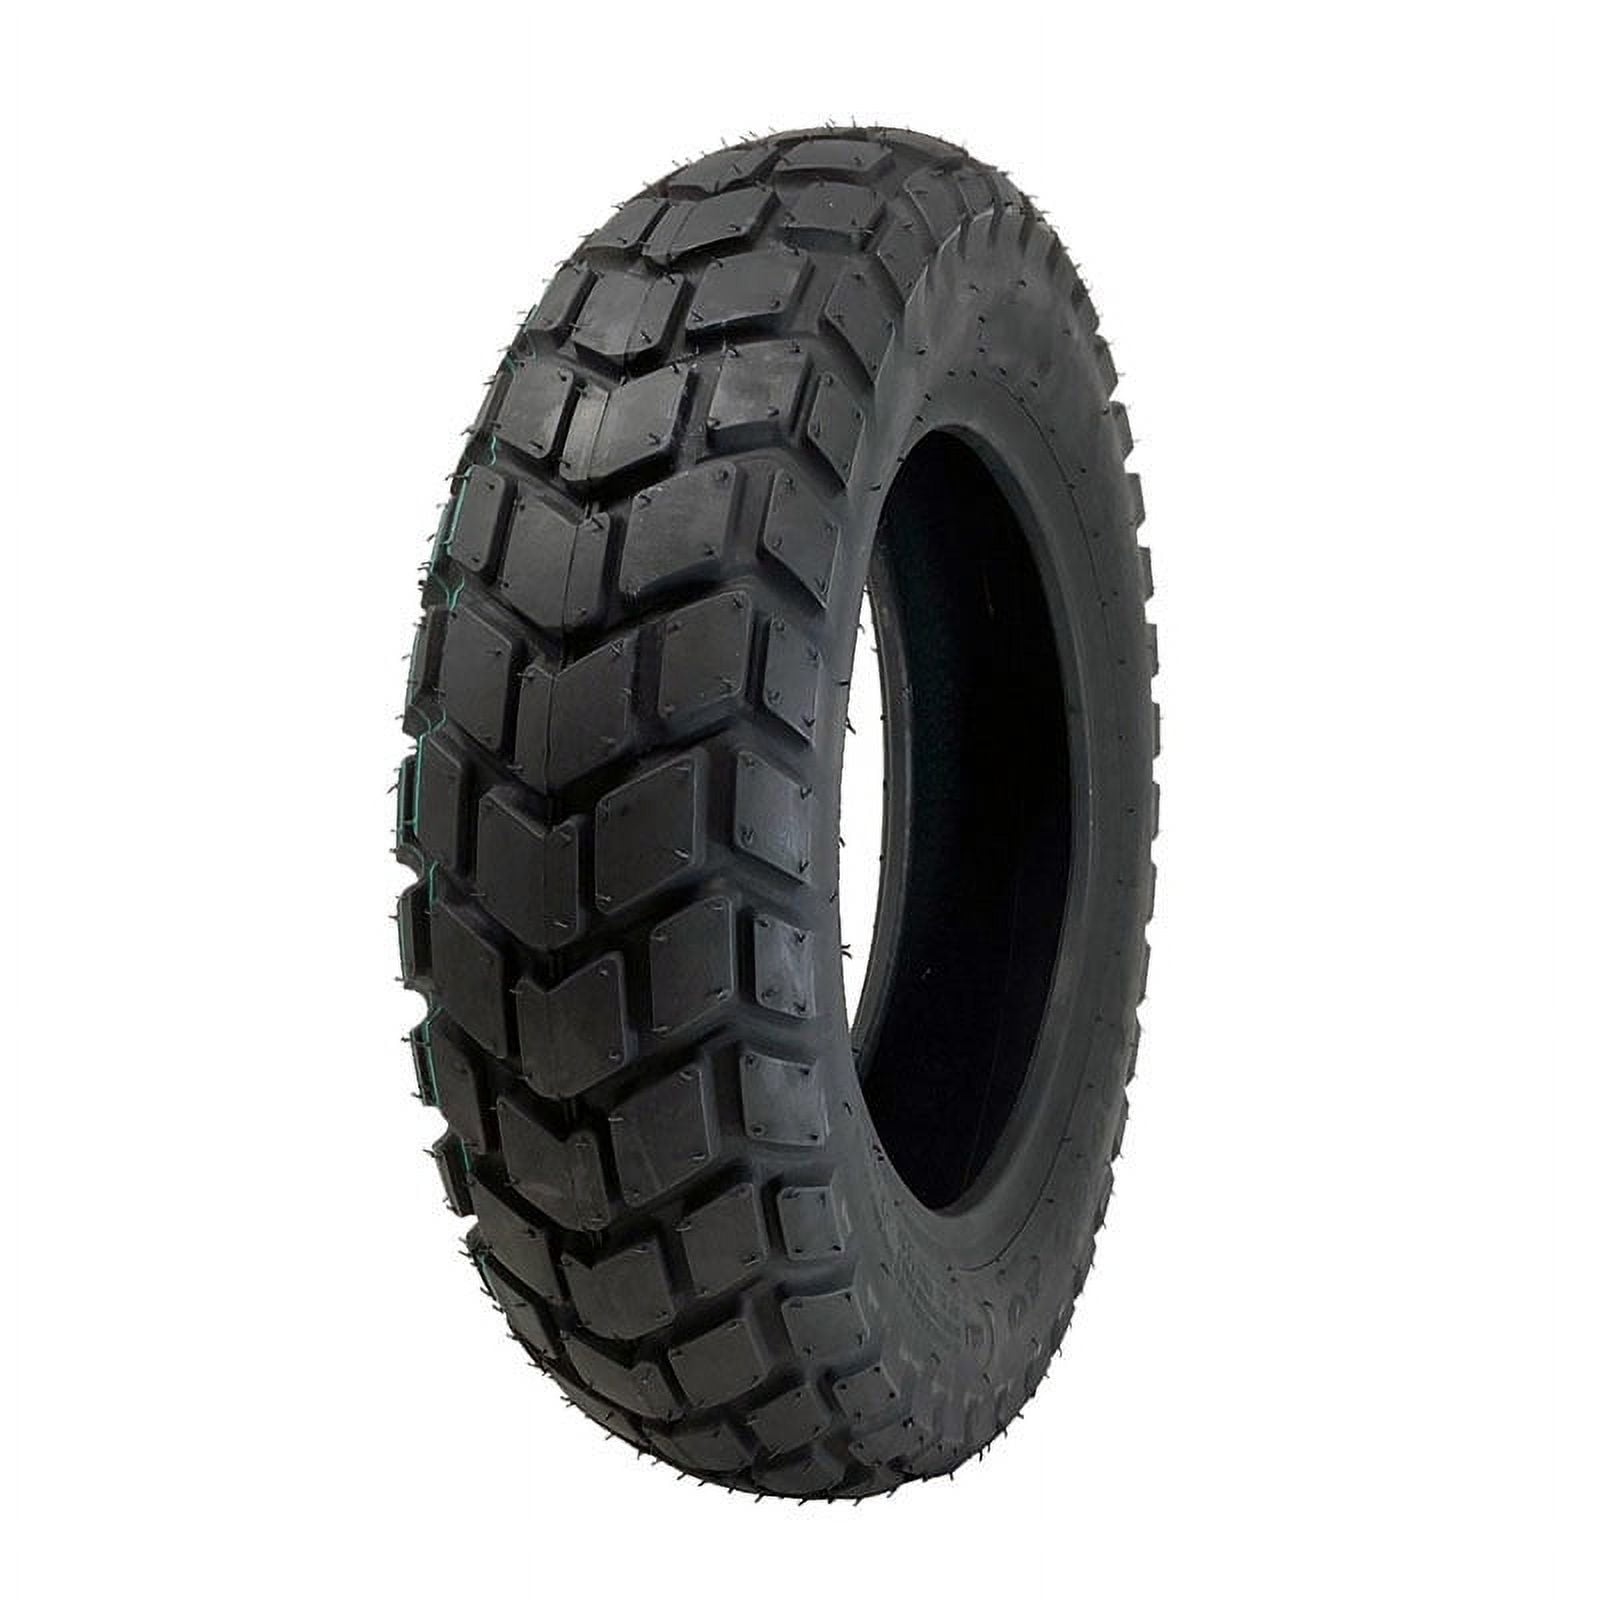 MMG Scooter Tubeless Tire 3.00-10 Front Rear Motorcycle Moped 10 inches Rim